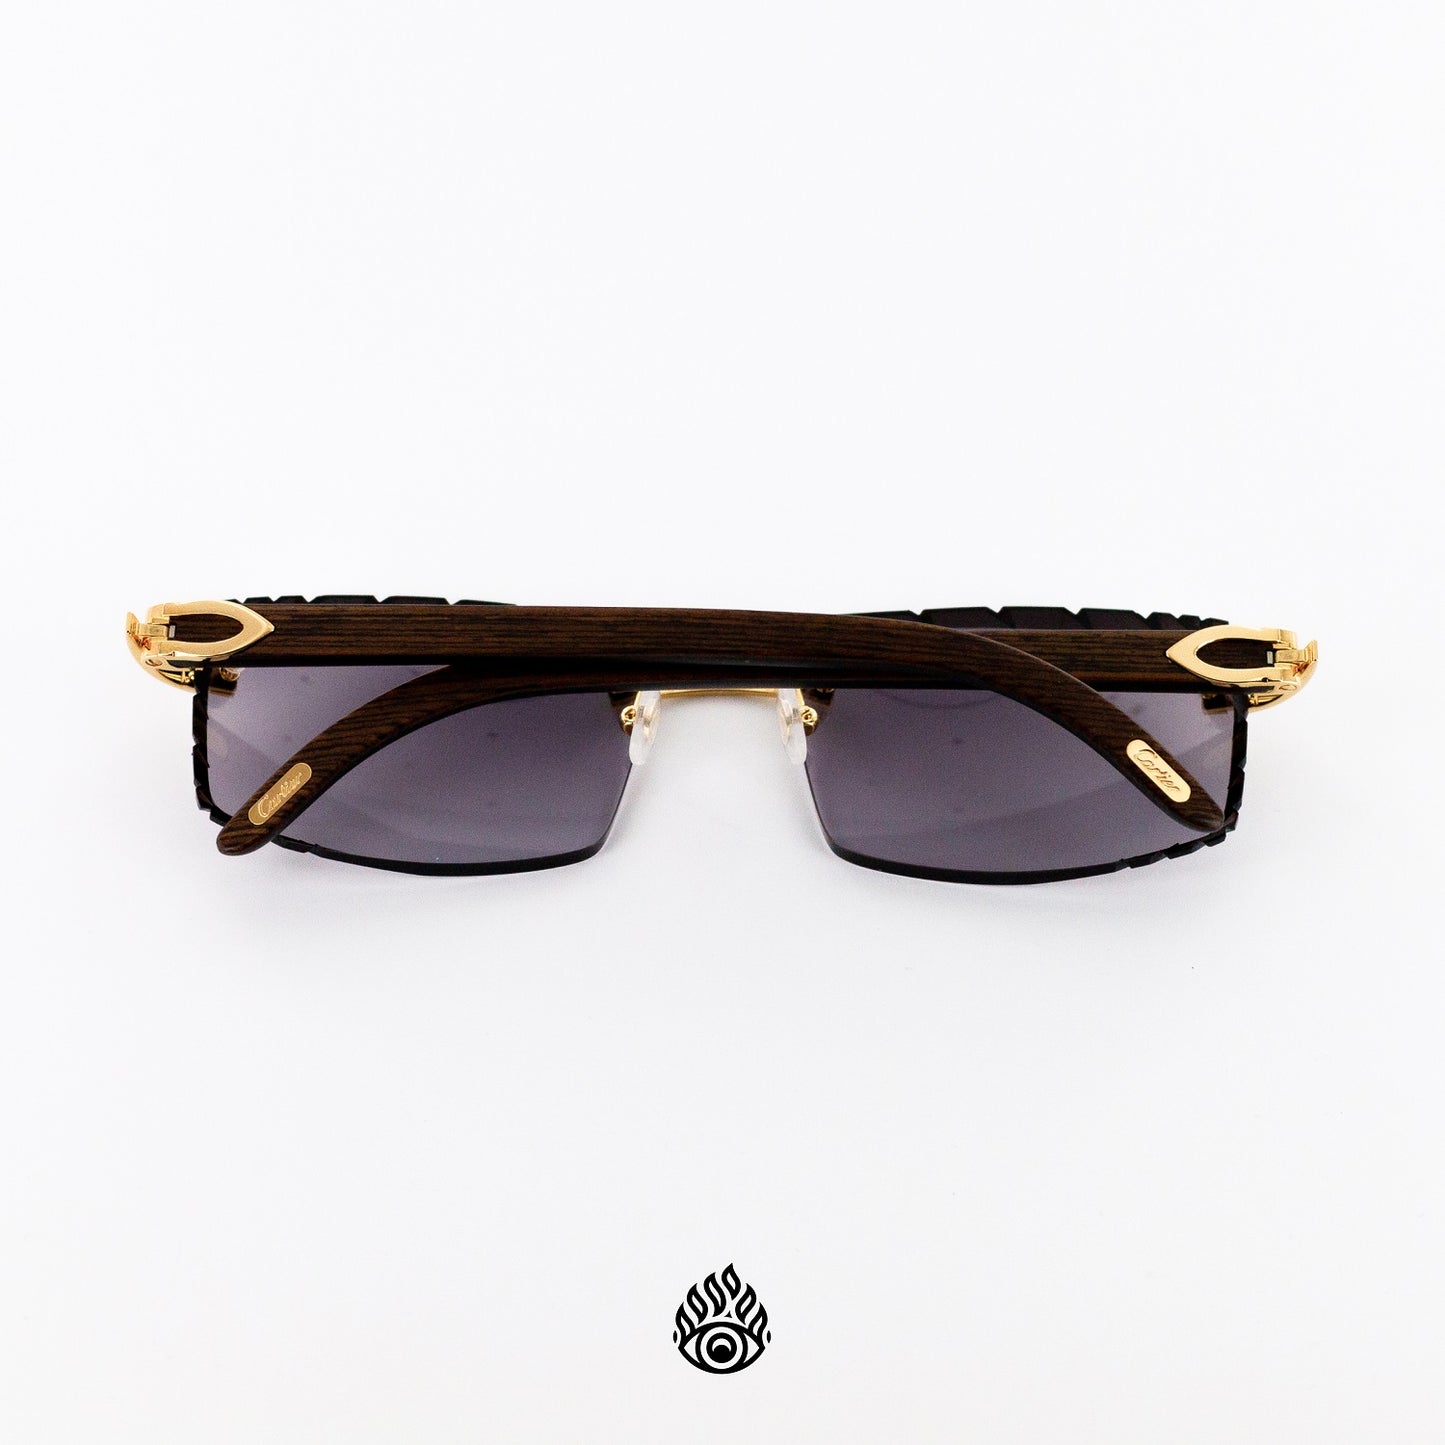 Cartier Dark Wood Glasses with Gold C Decor and Purple Lens